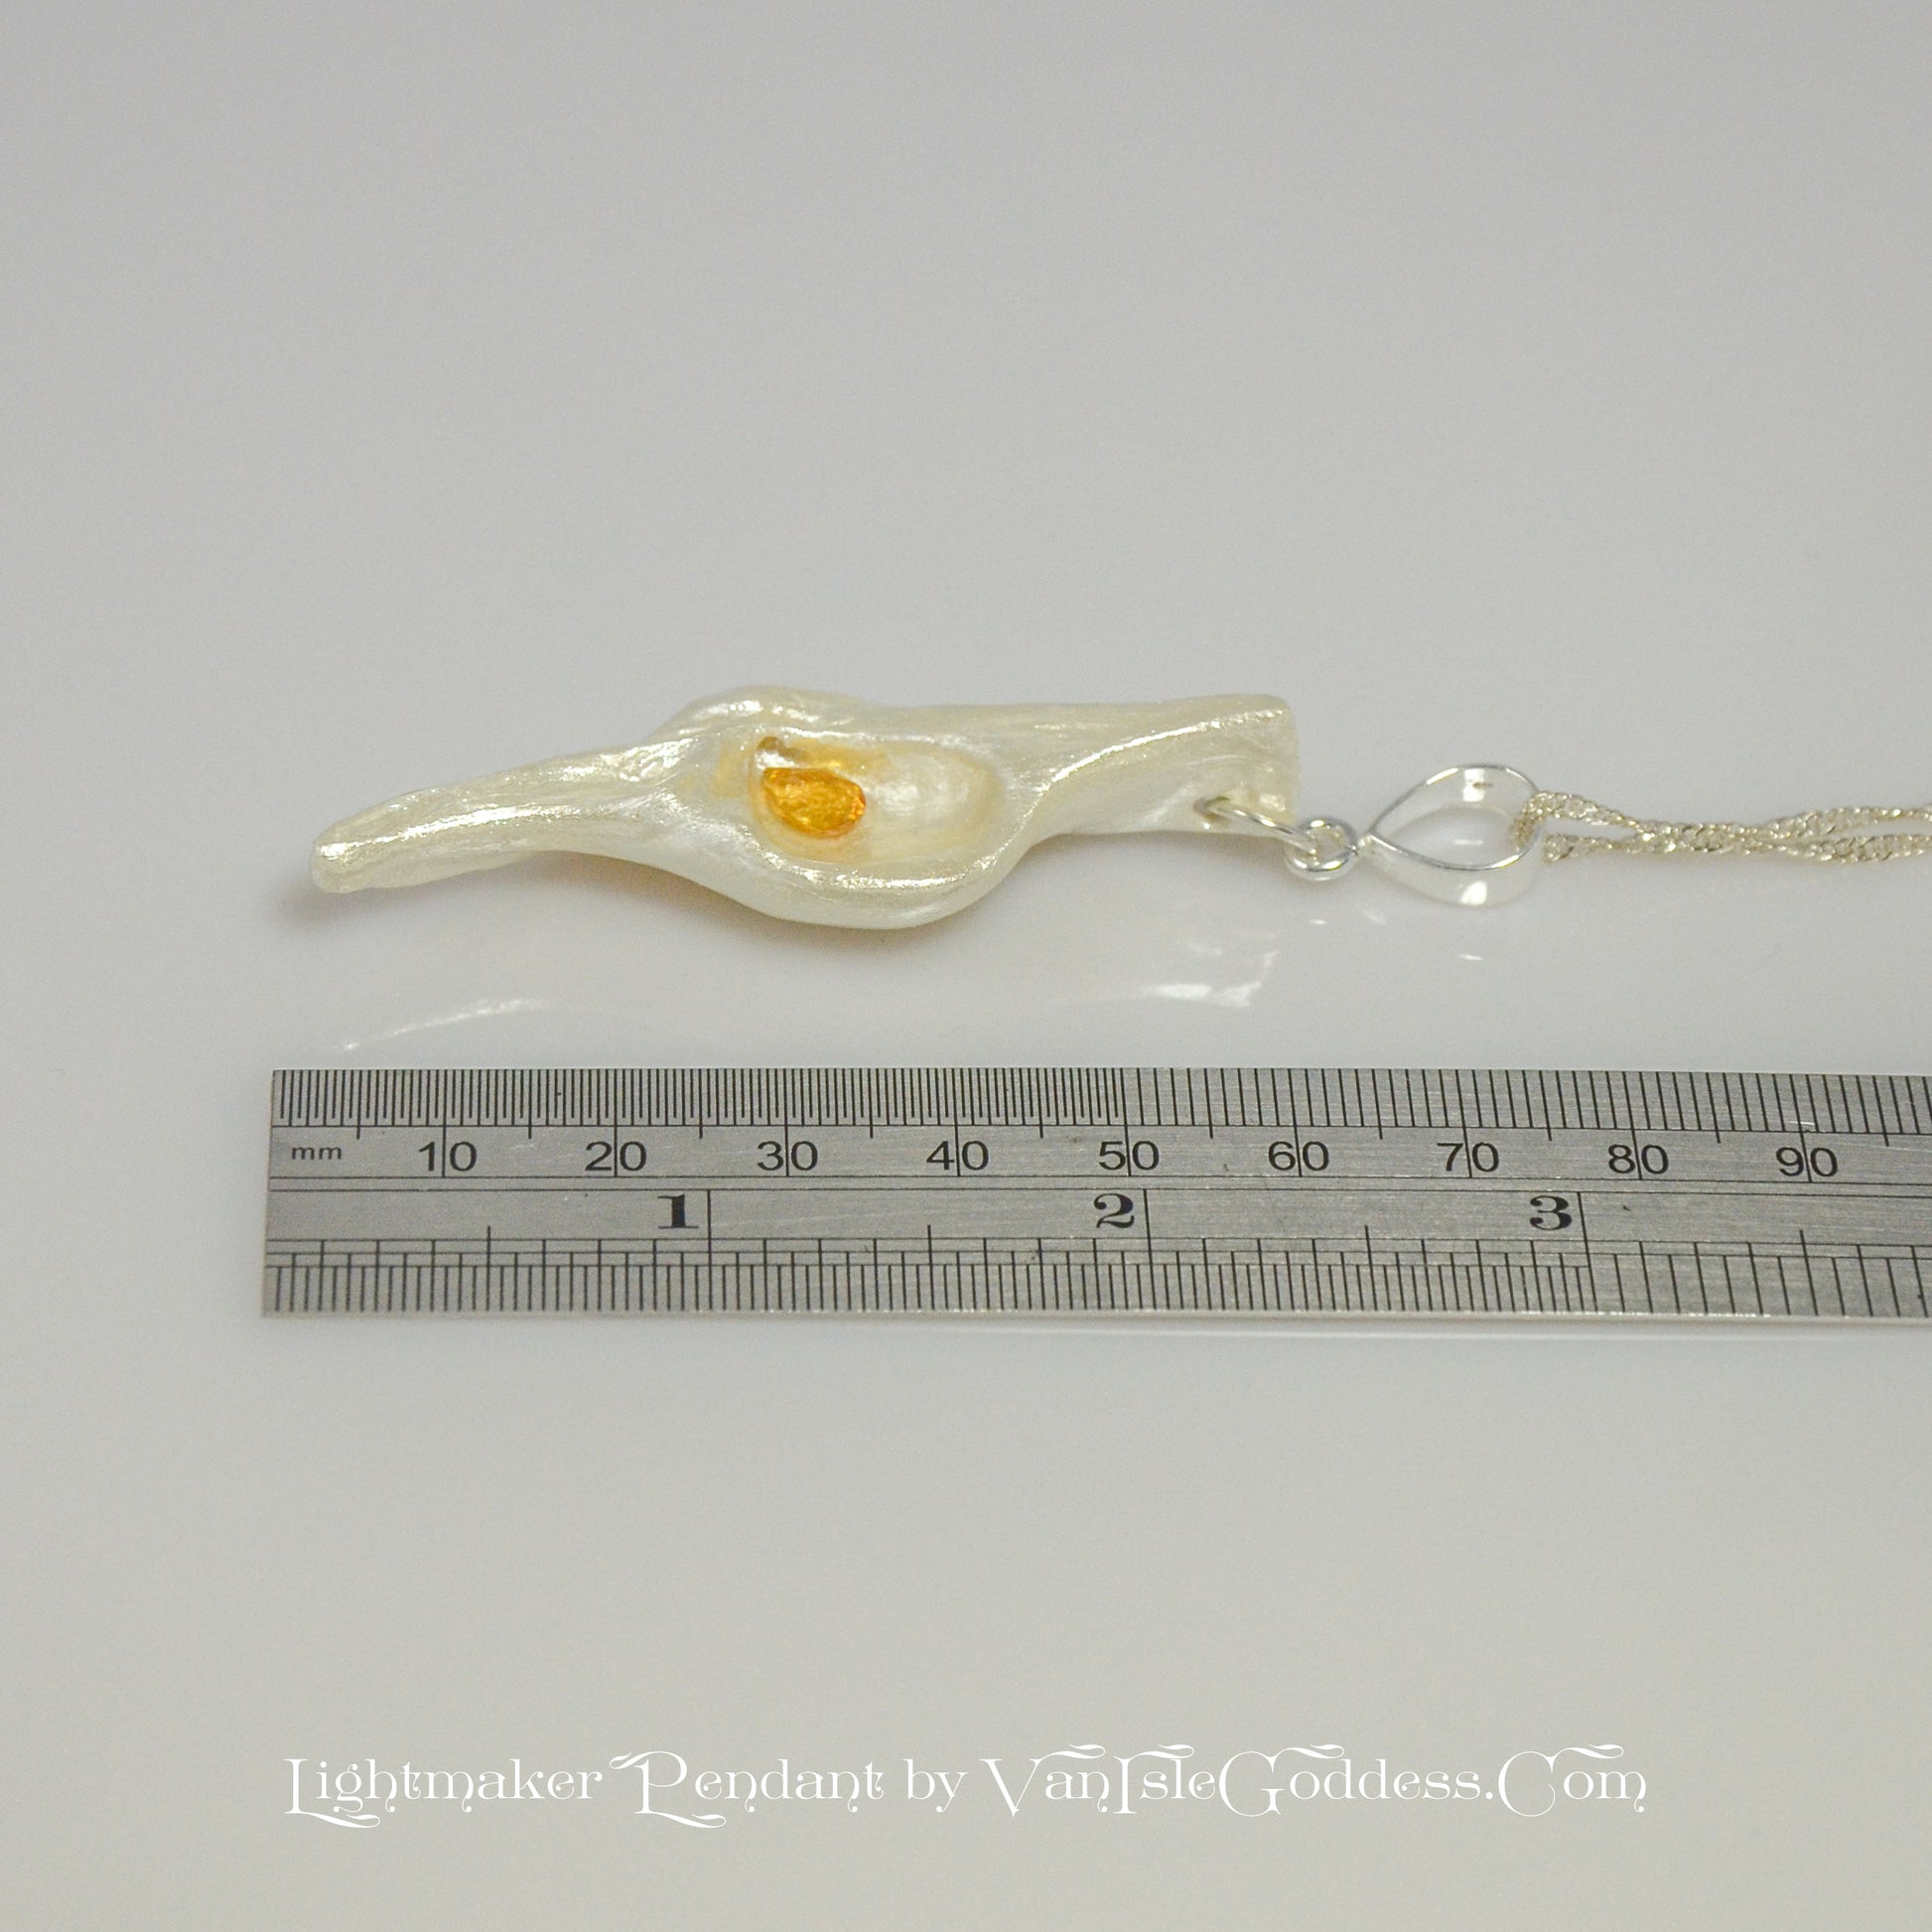 Lightmaker natural seashell pendant A beautiful pear shaped rose cut Citrine compliments the pendant. The pendant is shown along side a ruler so the viewer can see the length of the pendant.